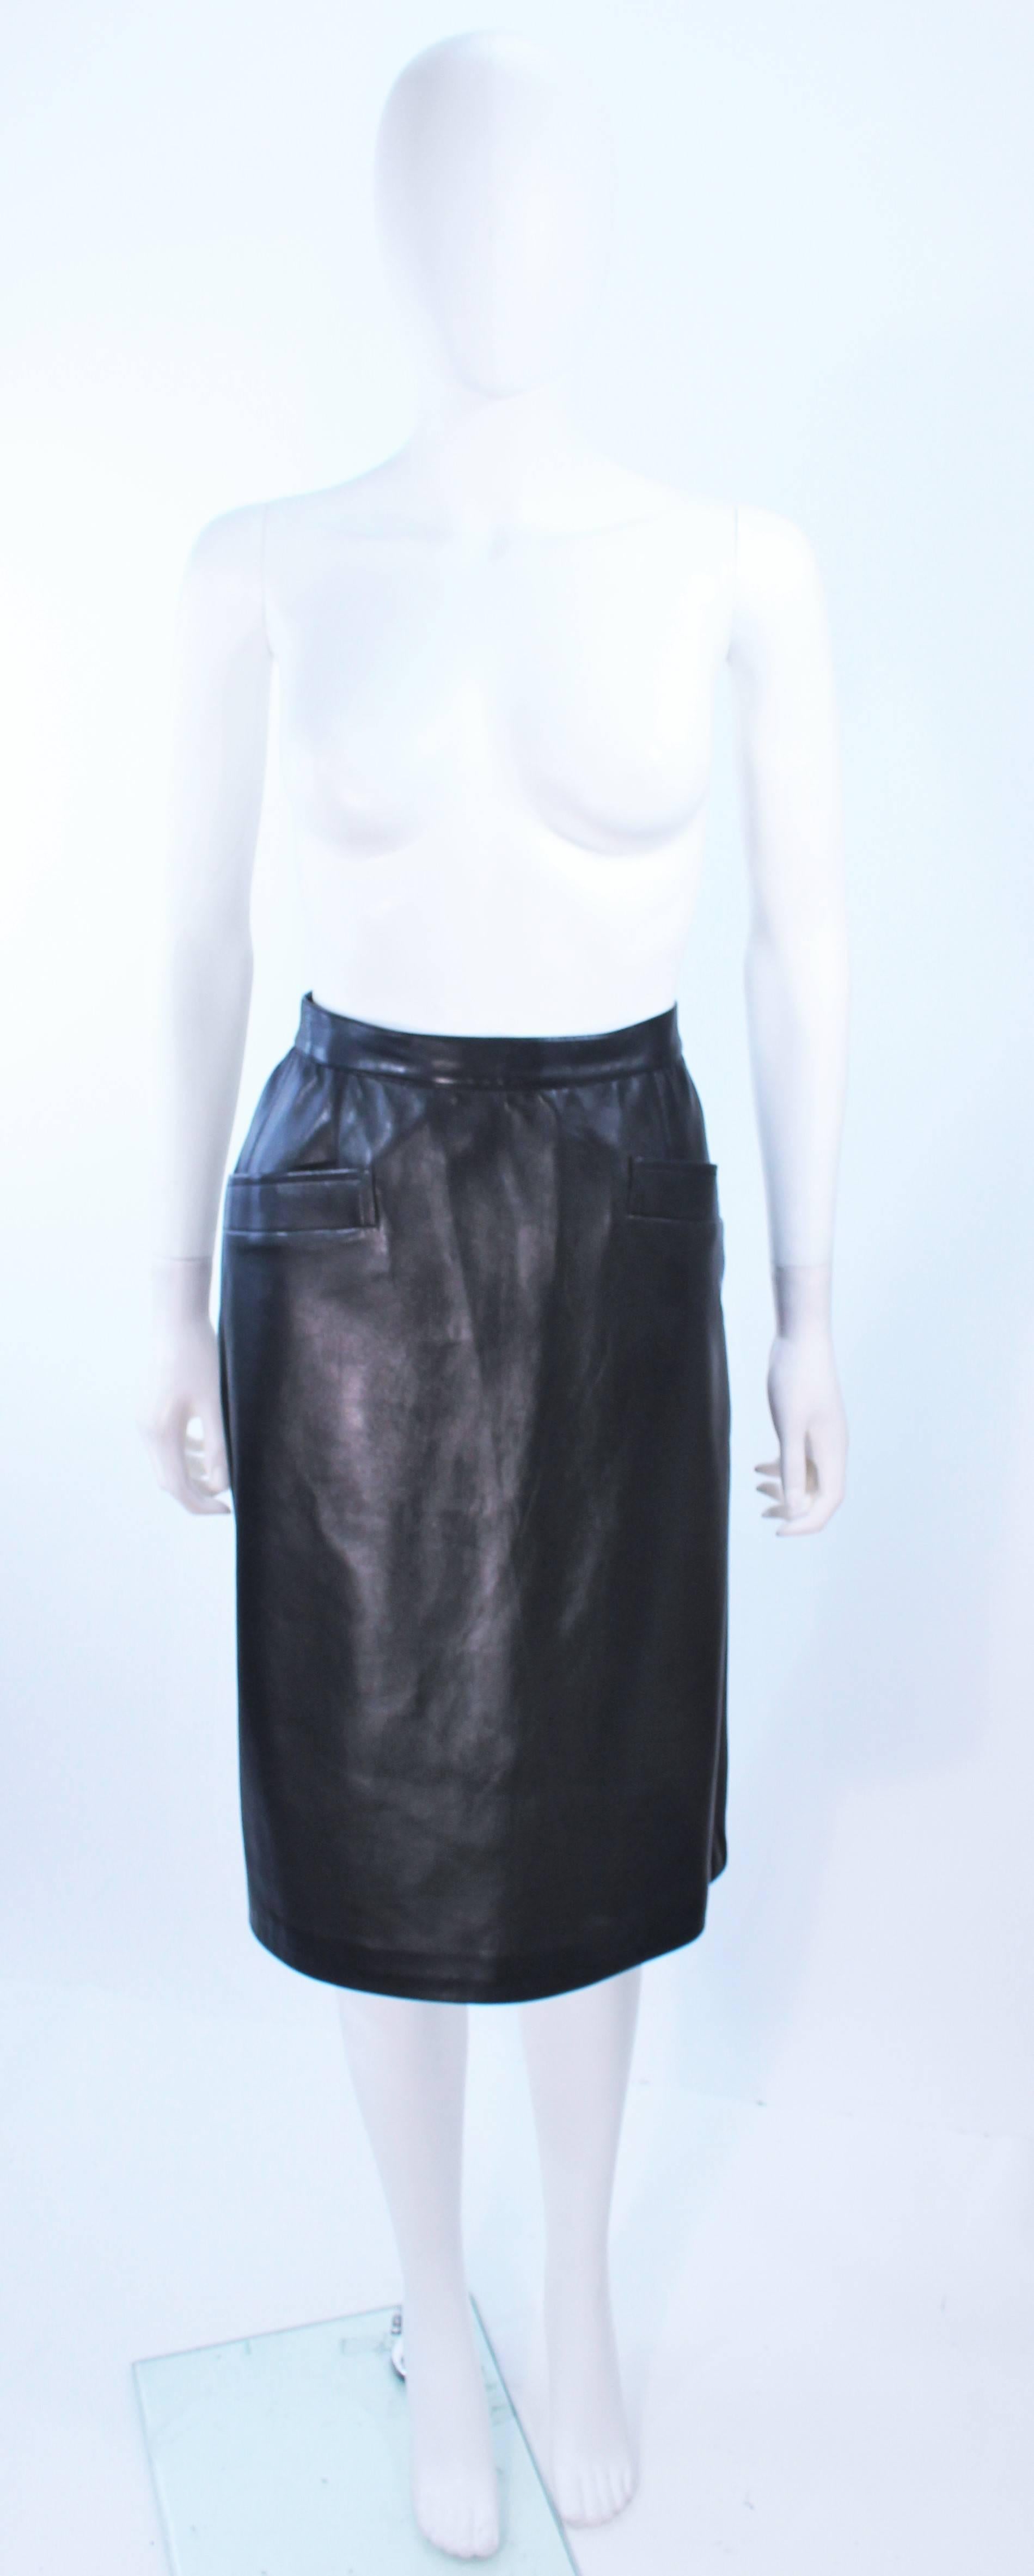 This Yves Saint Laurent skirt is composed of black leather. Features a pencil  silhouette with front pocket applique. There is a zipper closure. In excellent vintage condition.

**Please cross-reference measurements for personal accuracy. Size in